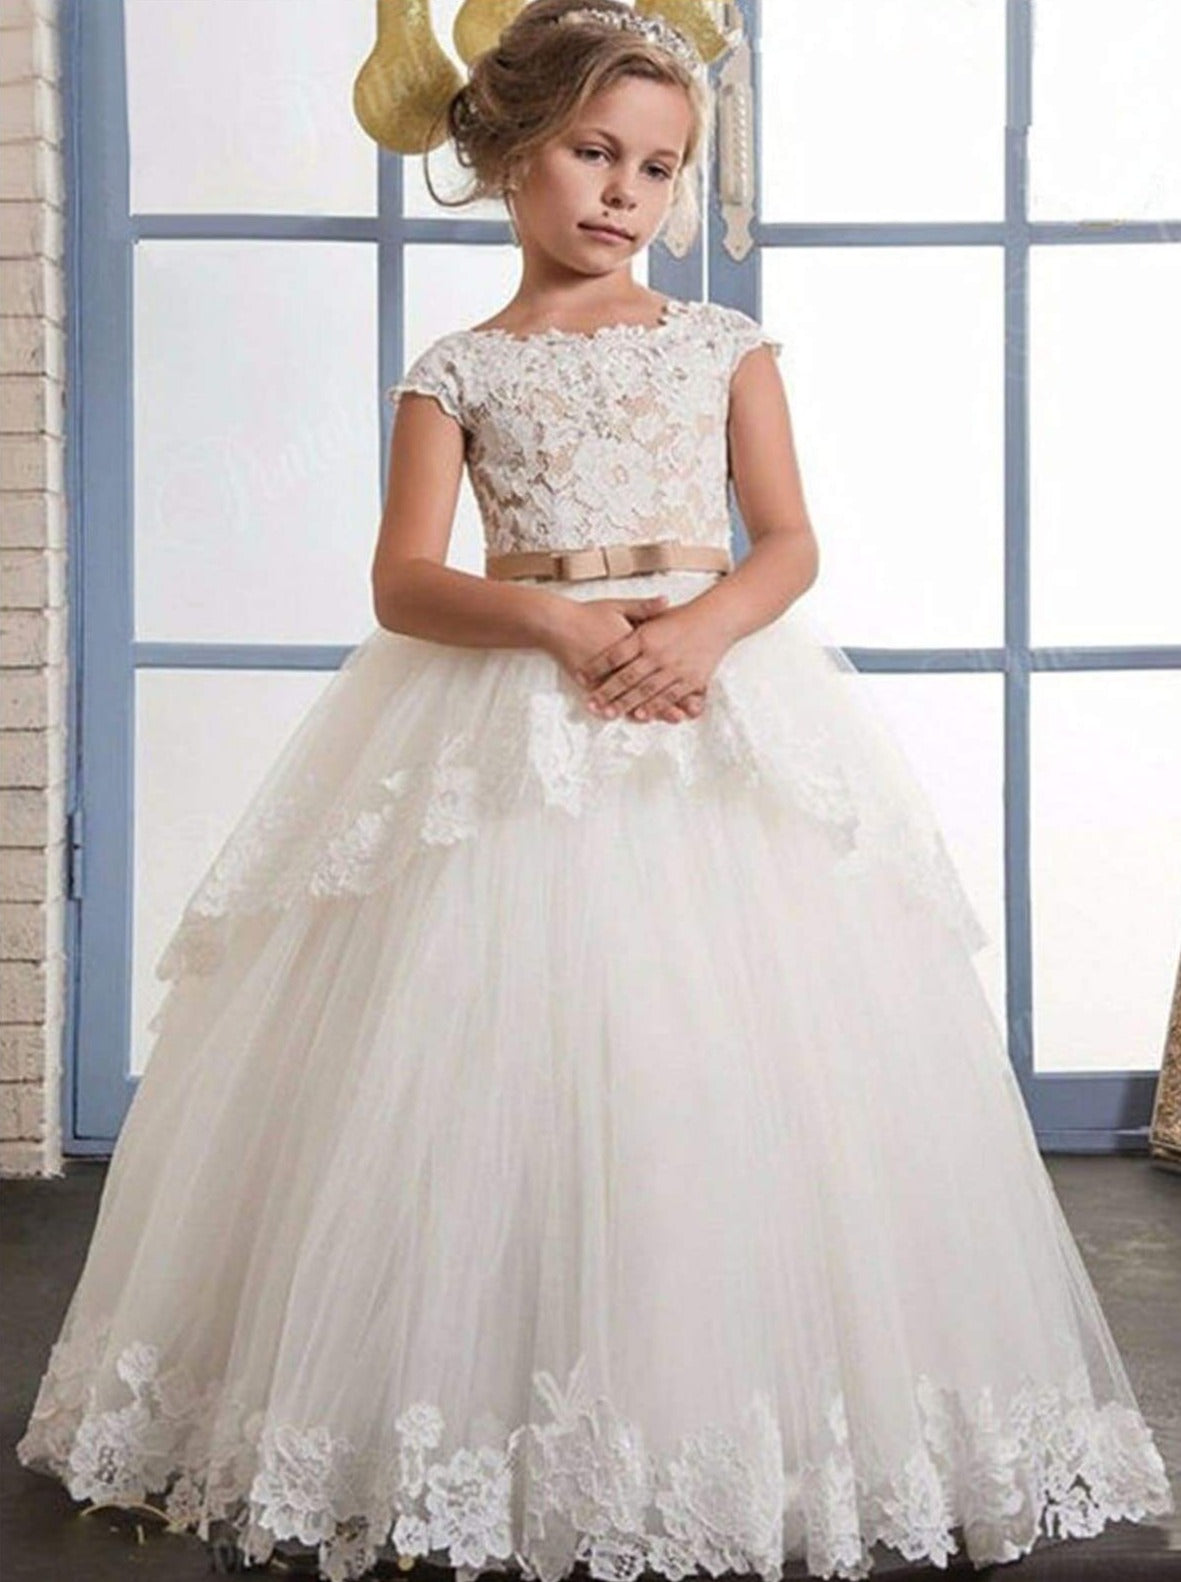 Mia Belle Girls Communion Dresses | White Lace Tiered Tulle Gown